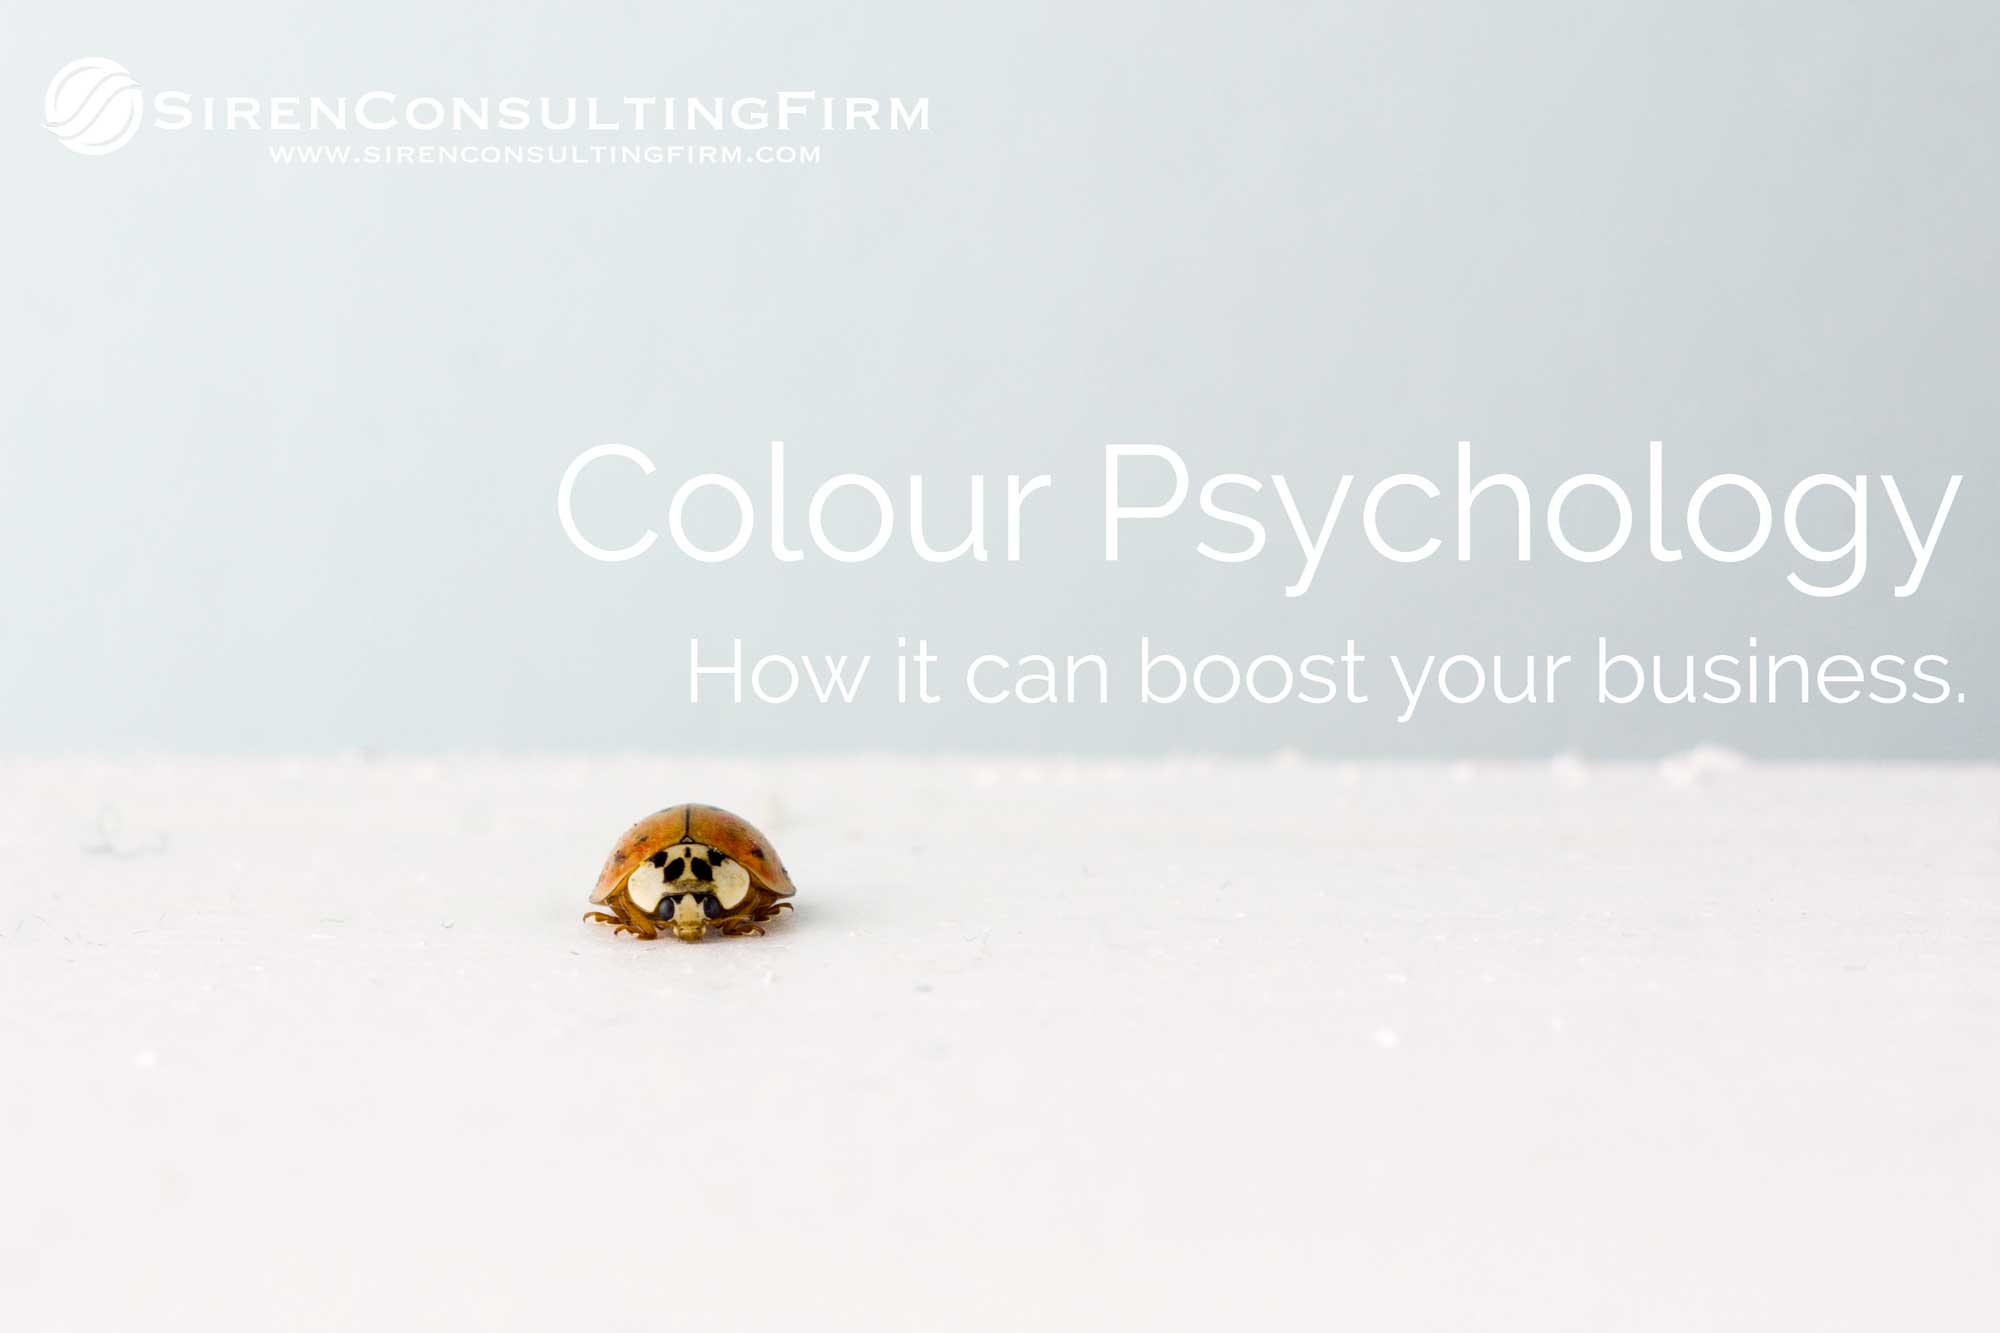 Colour Psychology: How It Can Boost Your Business